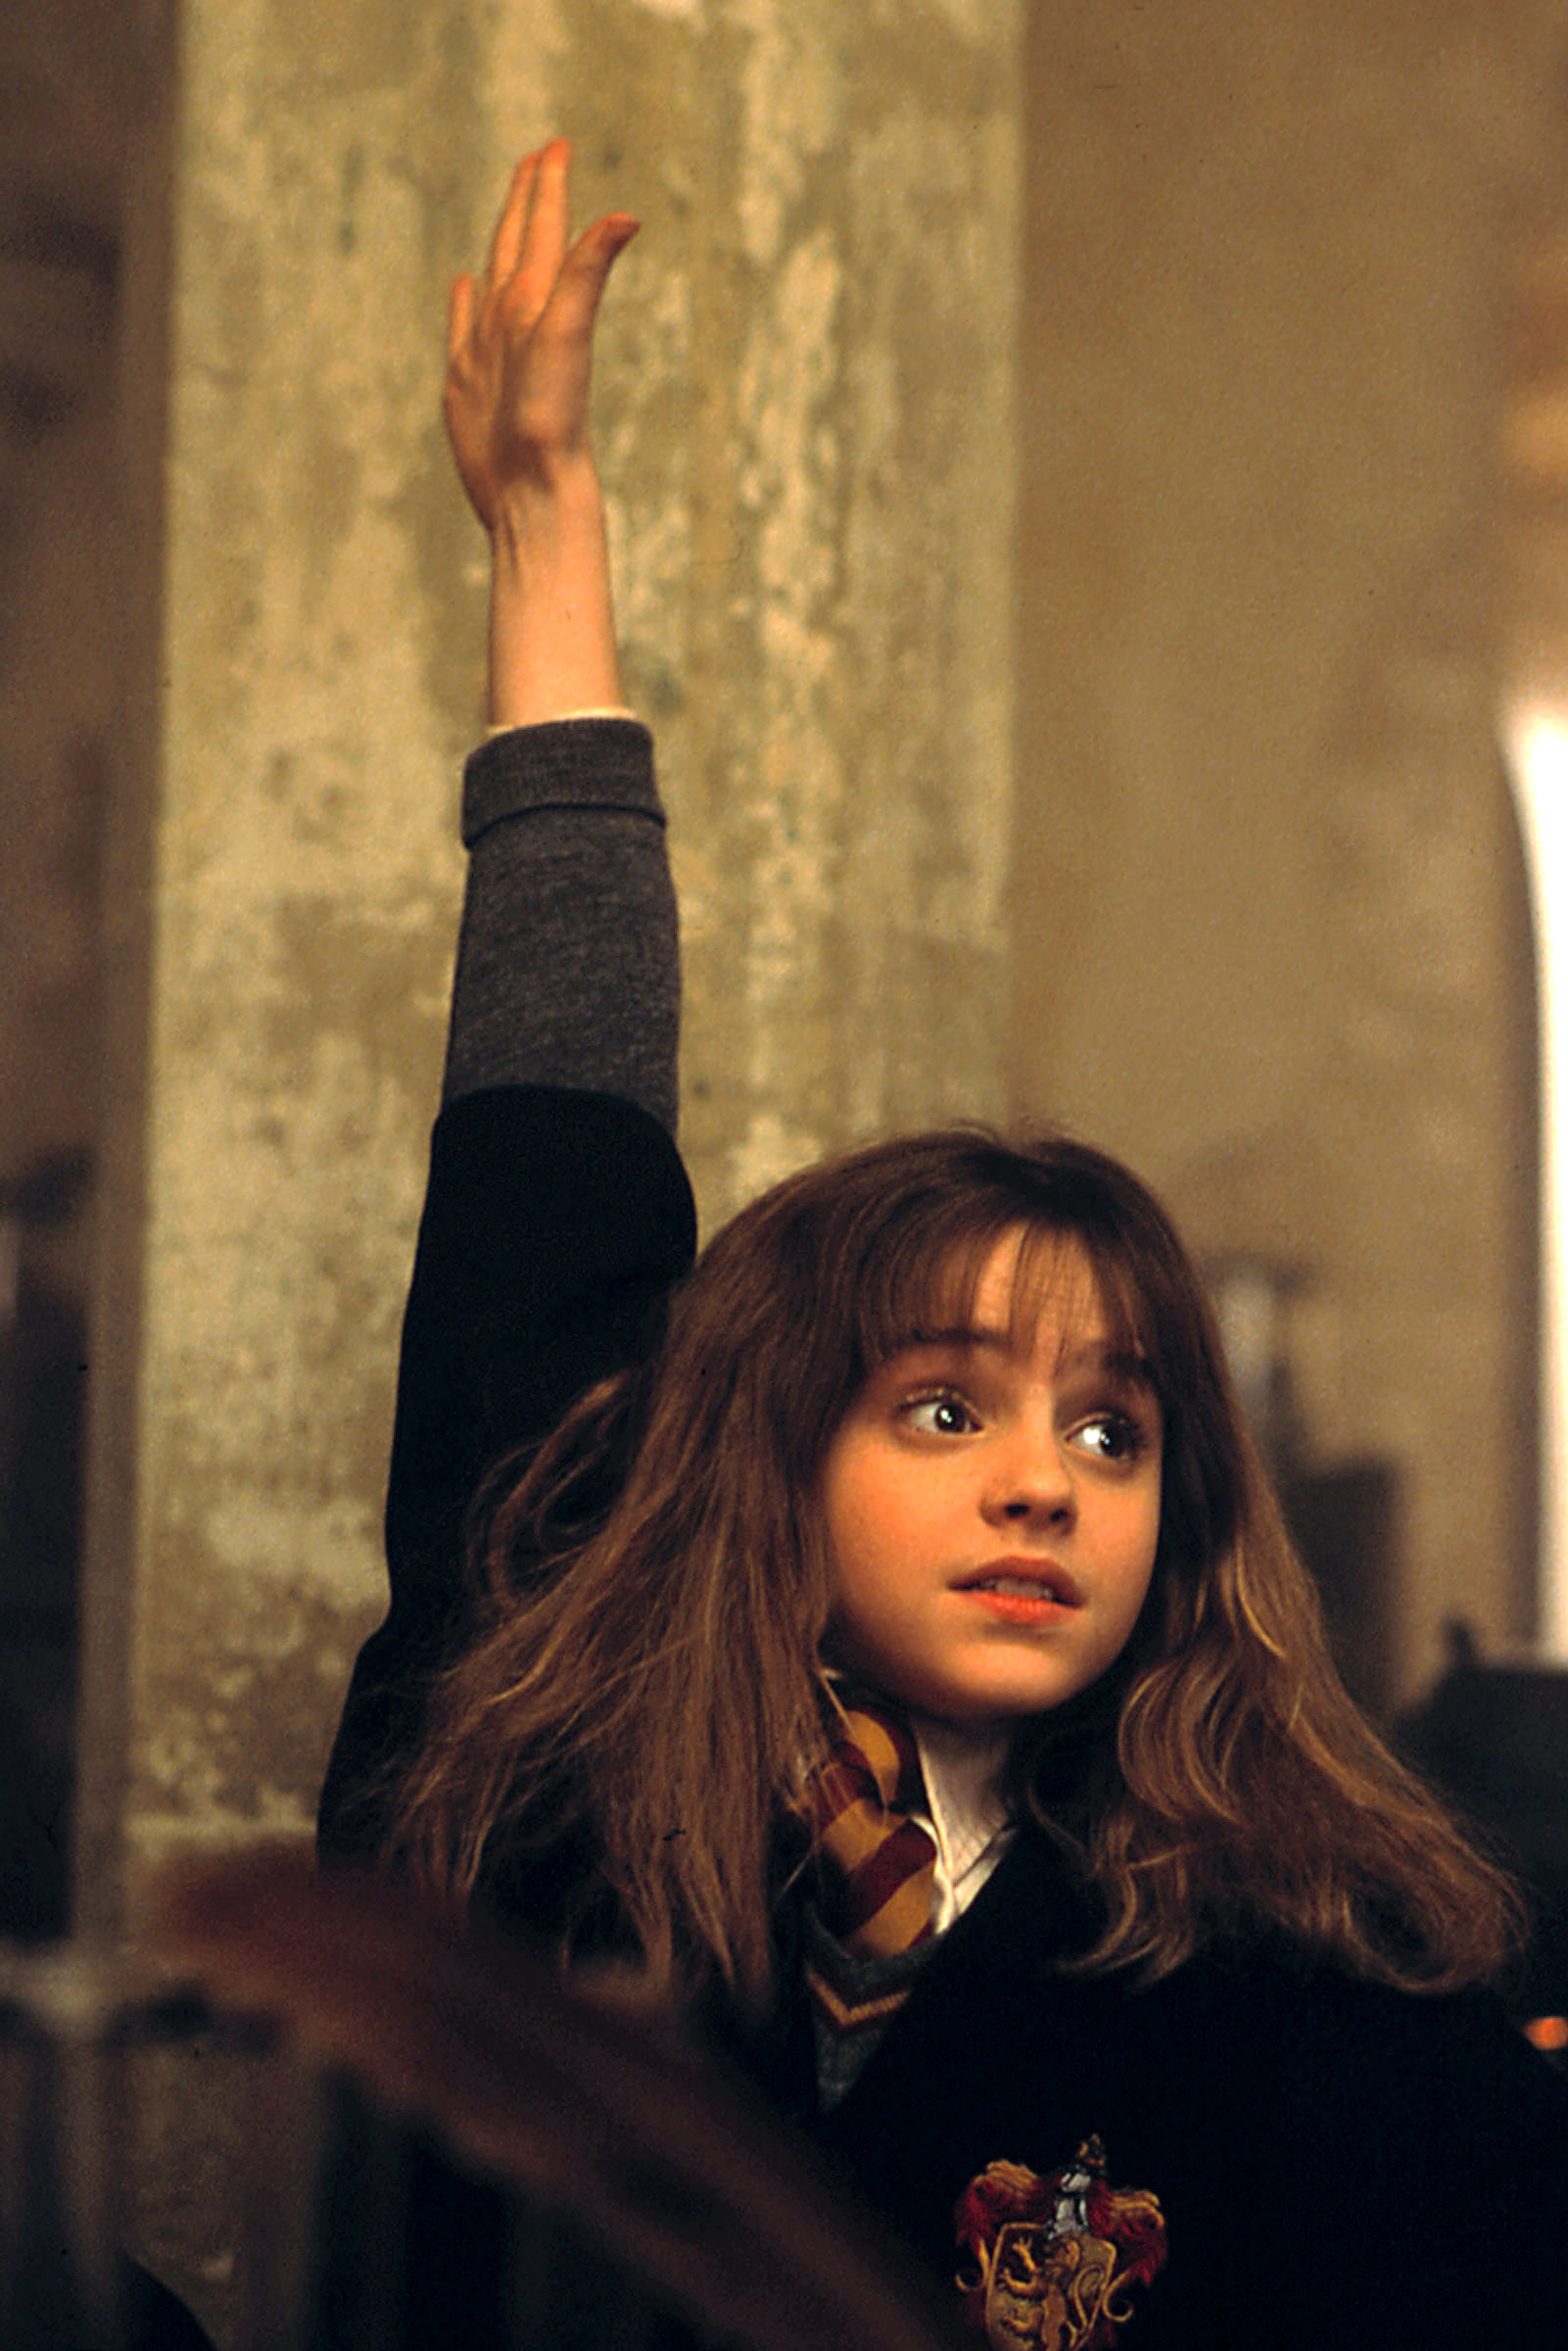 Hermione raises her hand in class excitedly